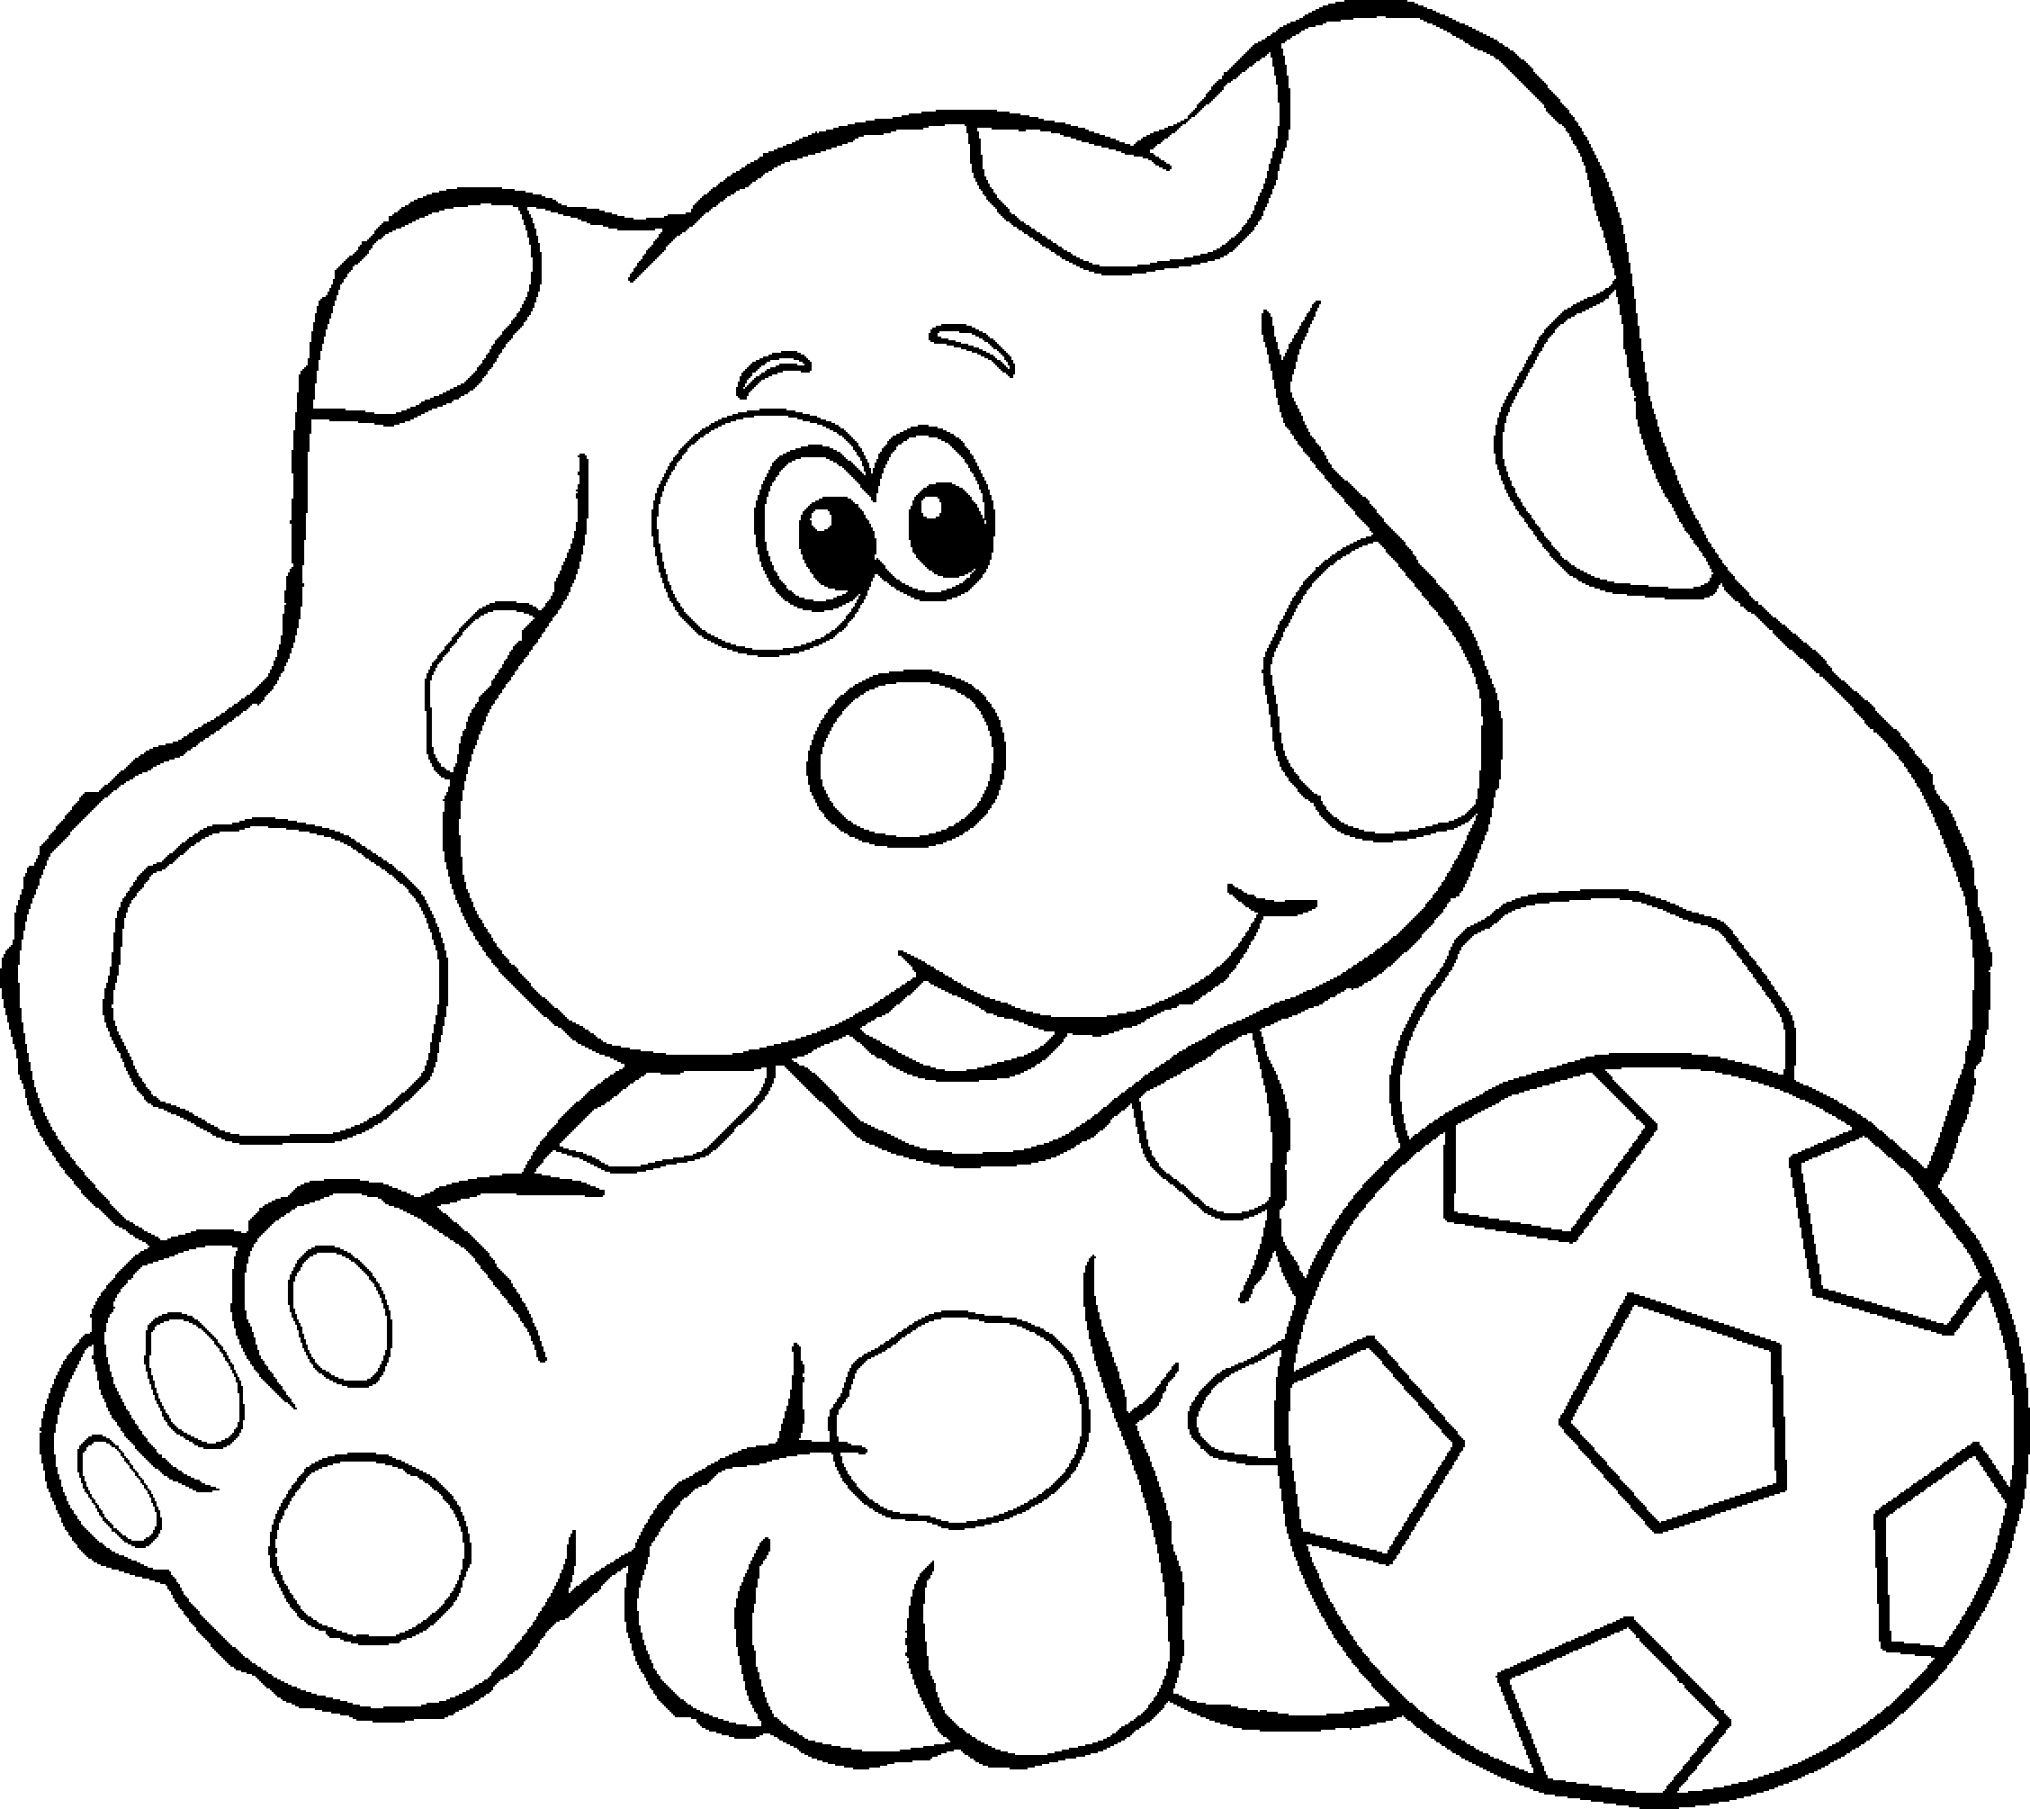 Blues Clues Coloring Pages To Print at GetColorings.com ...